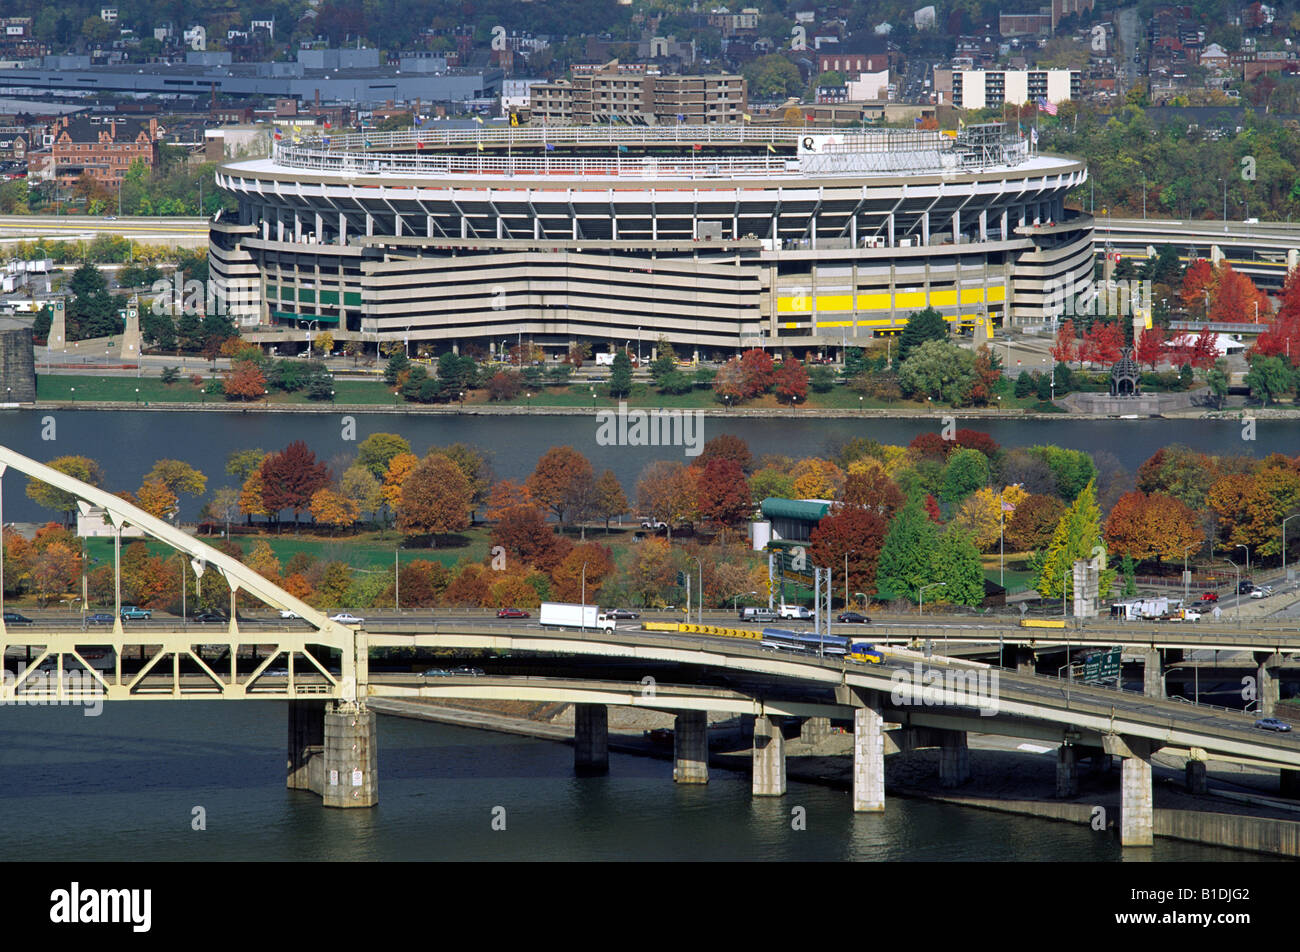 This Week in Pittsburgh History: Three Rivers Stadium Opens